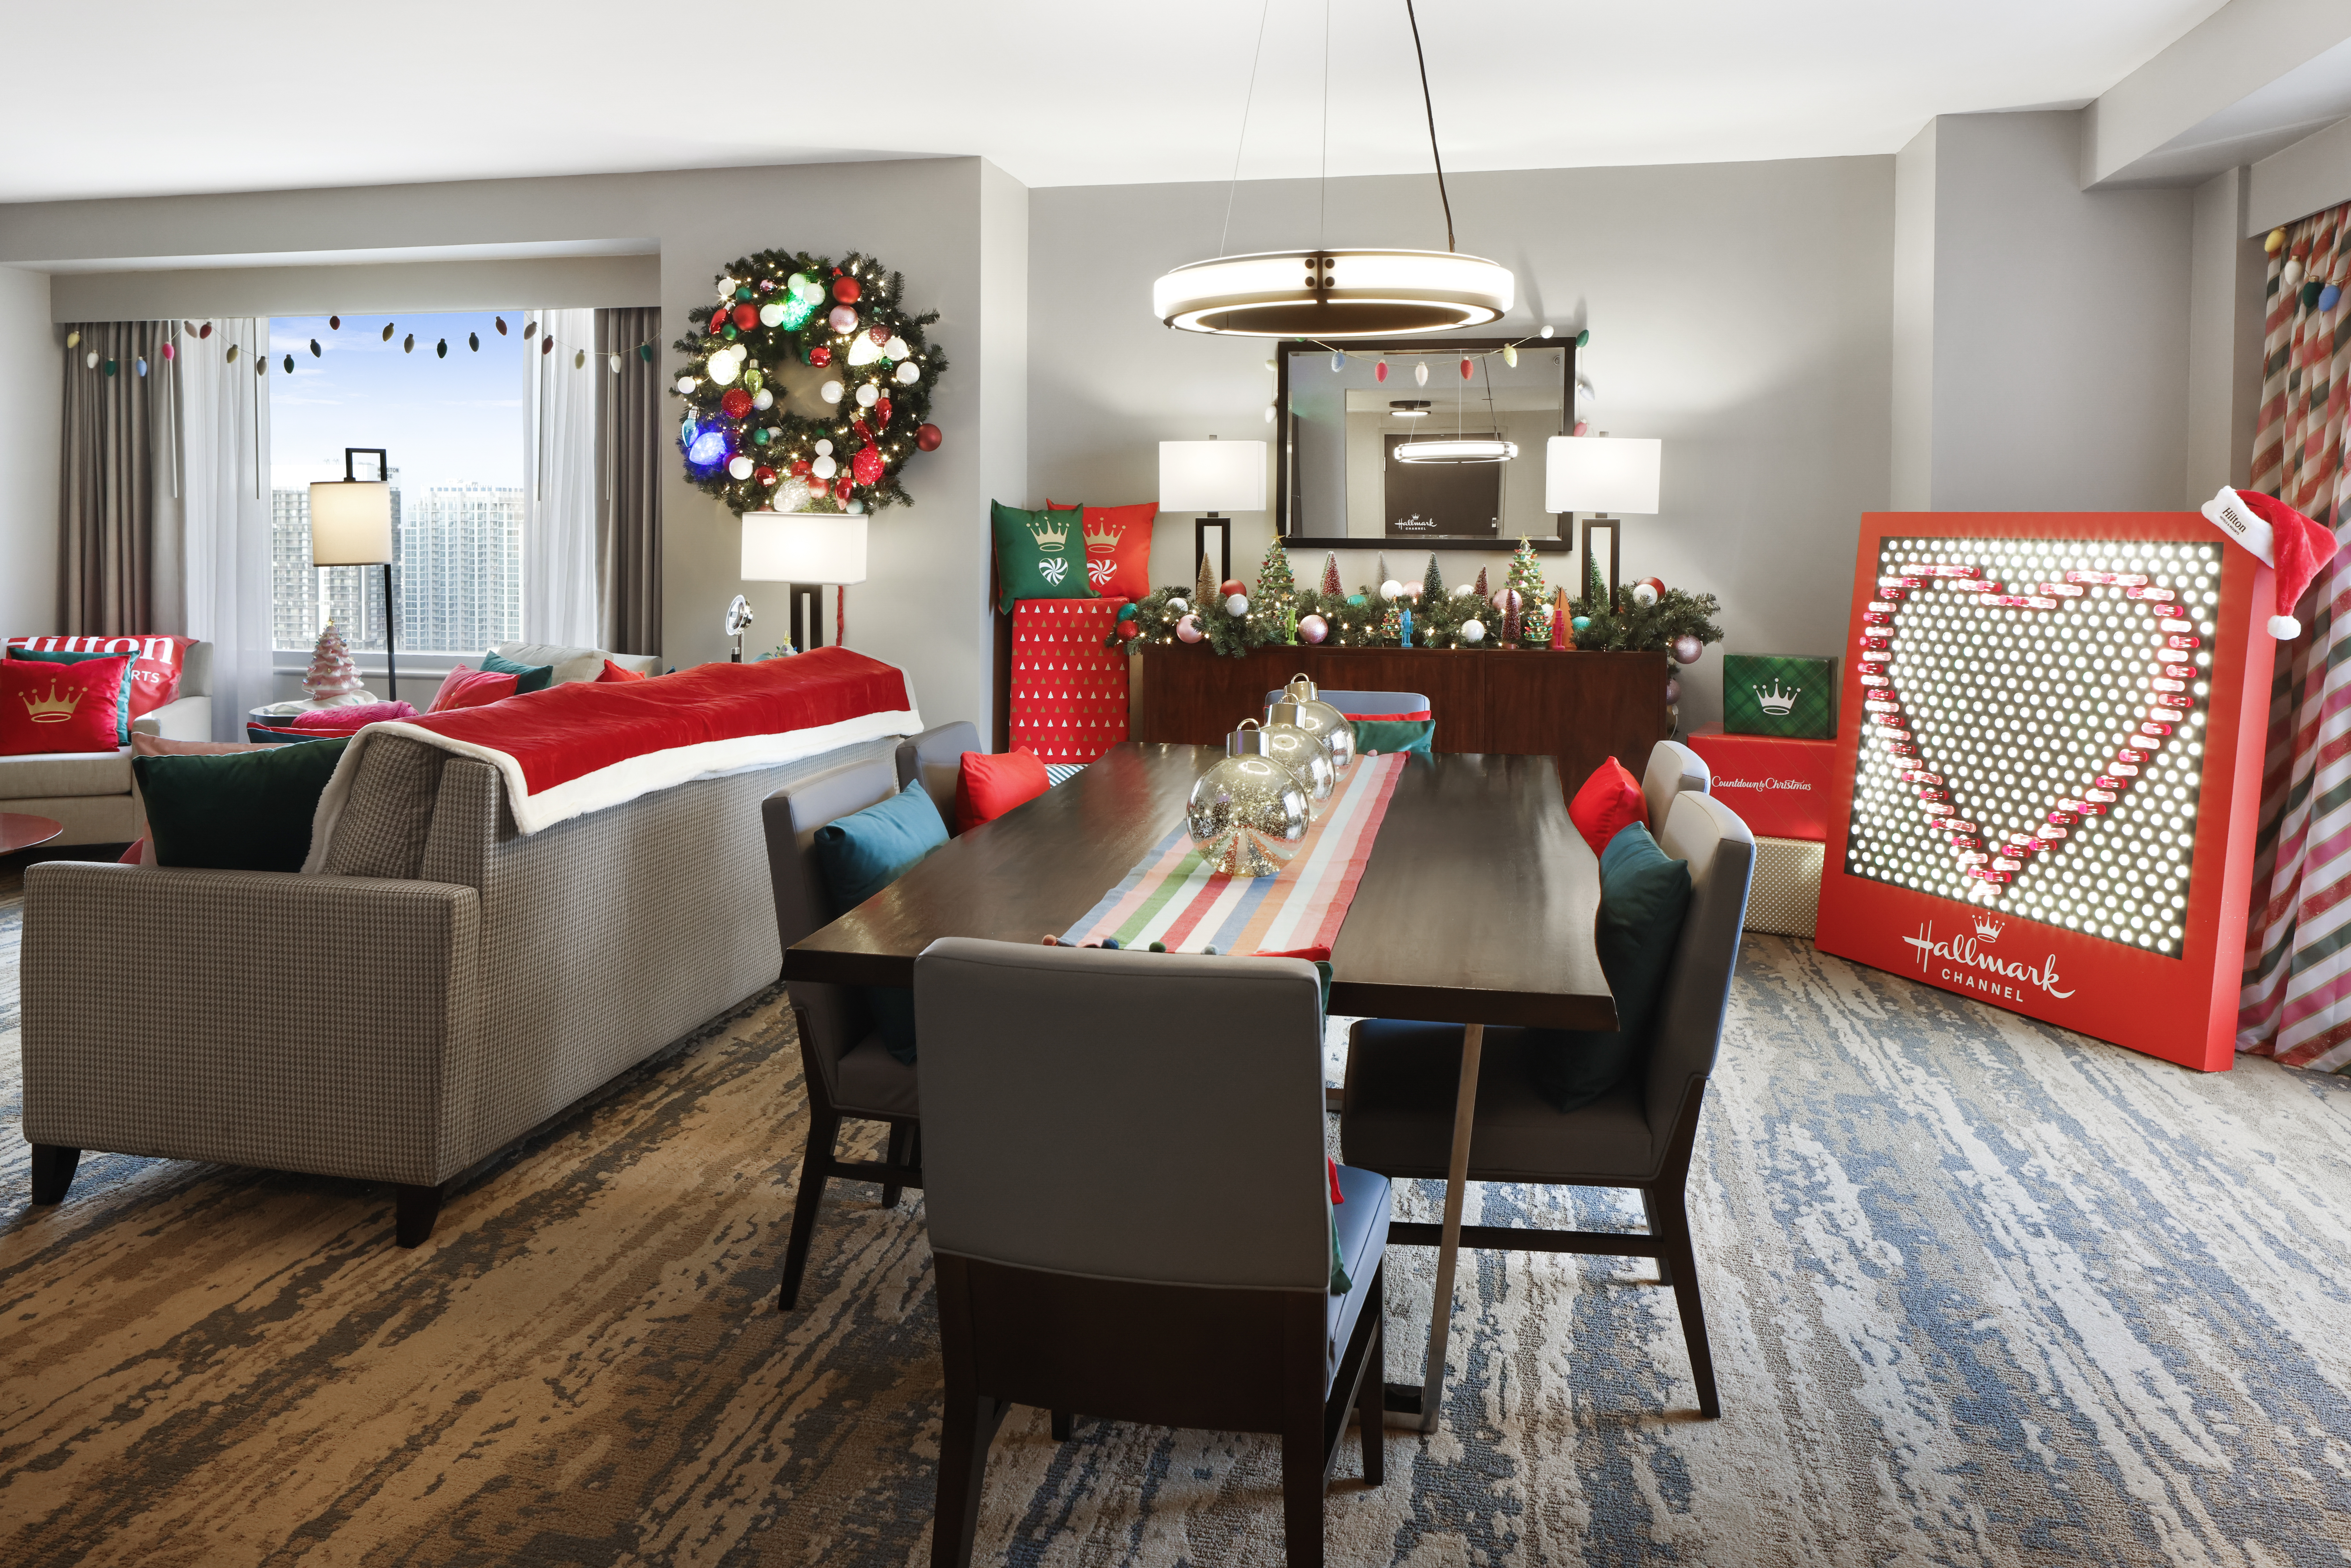 Hilton and Hallmark Channel Haul out the Holly Suite at Hilton Americas-Houston - Table and Seating